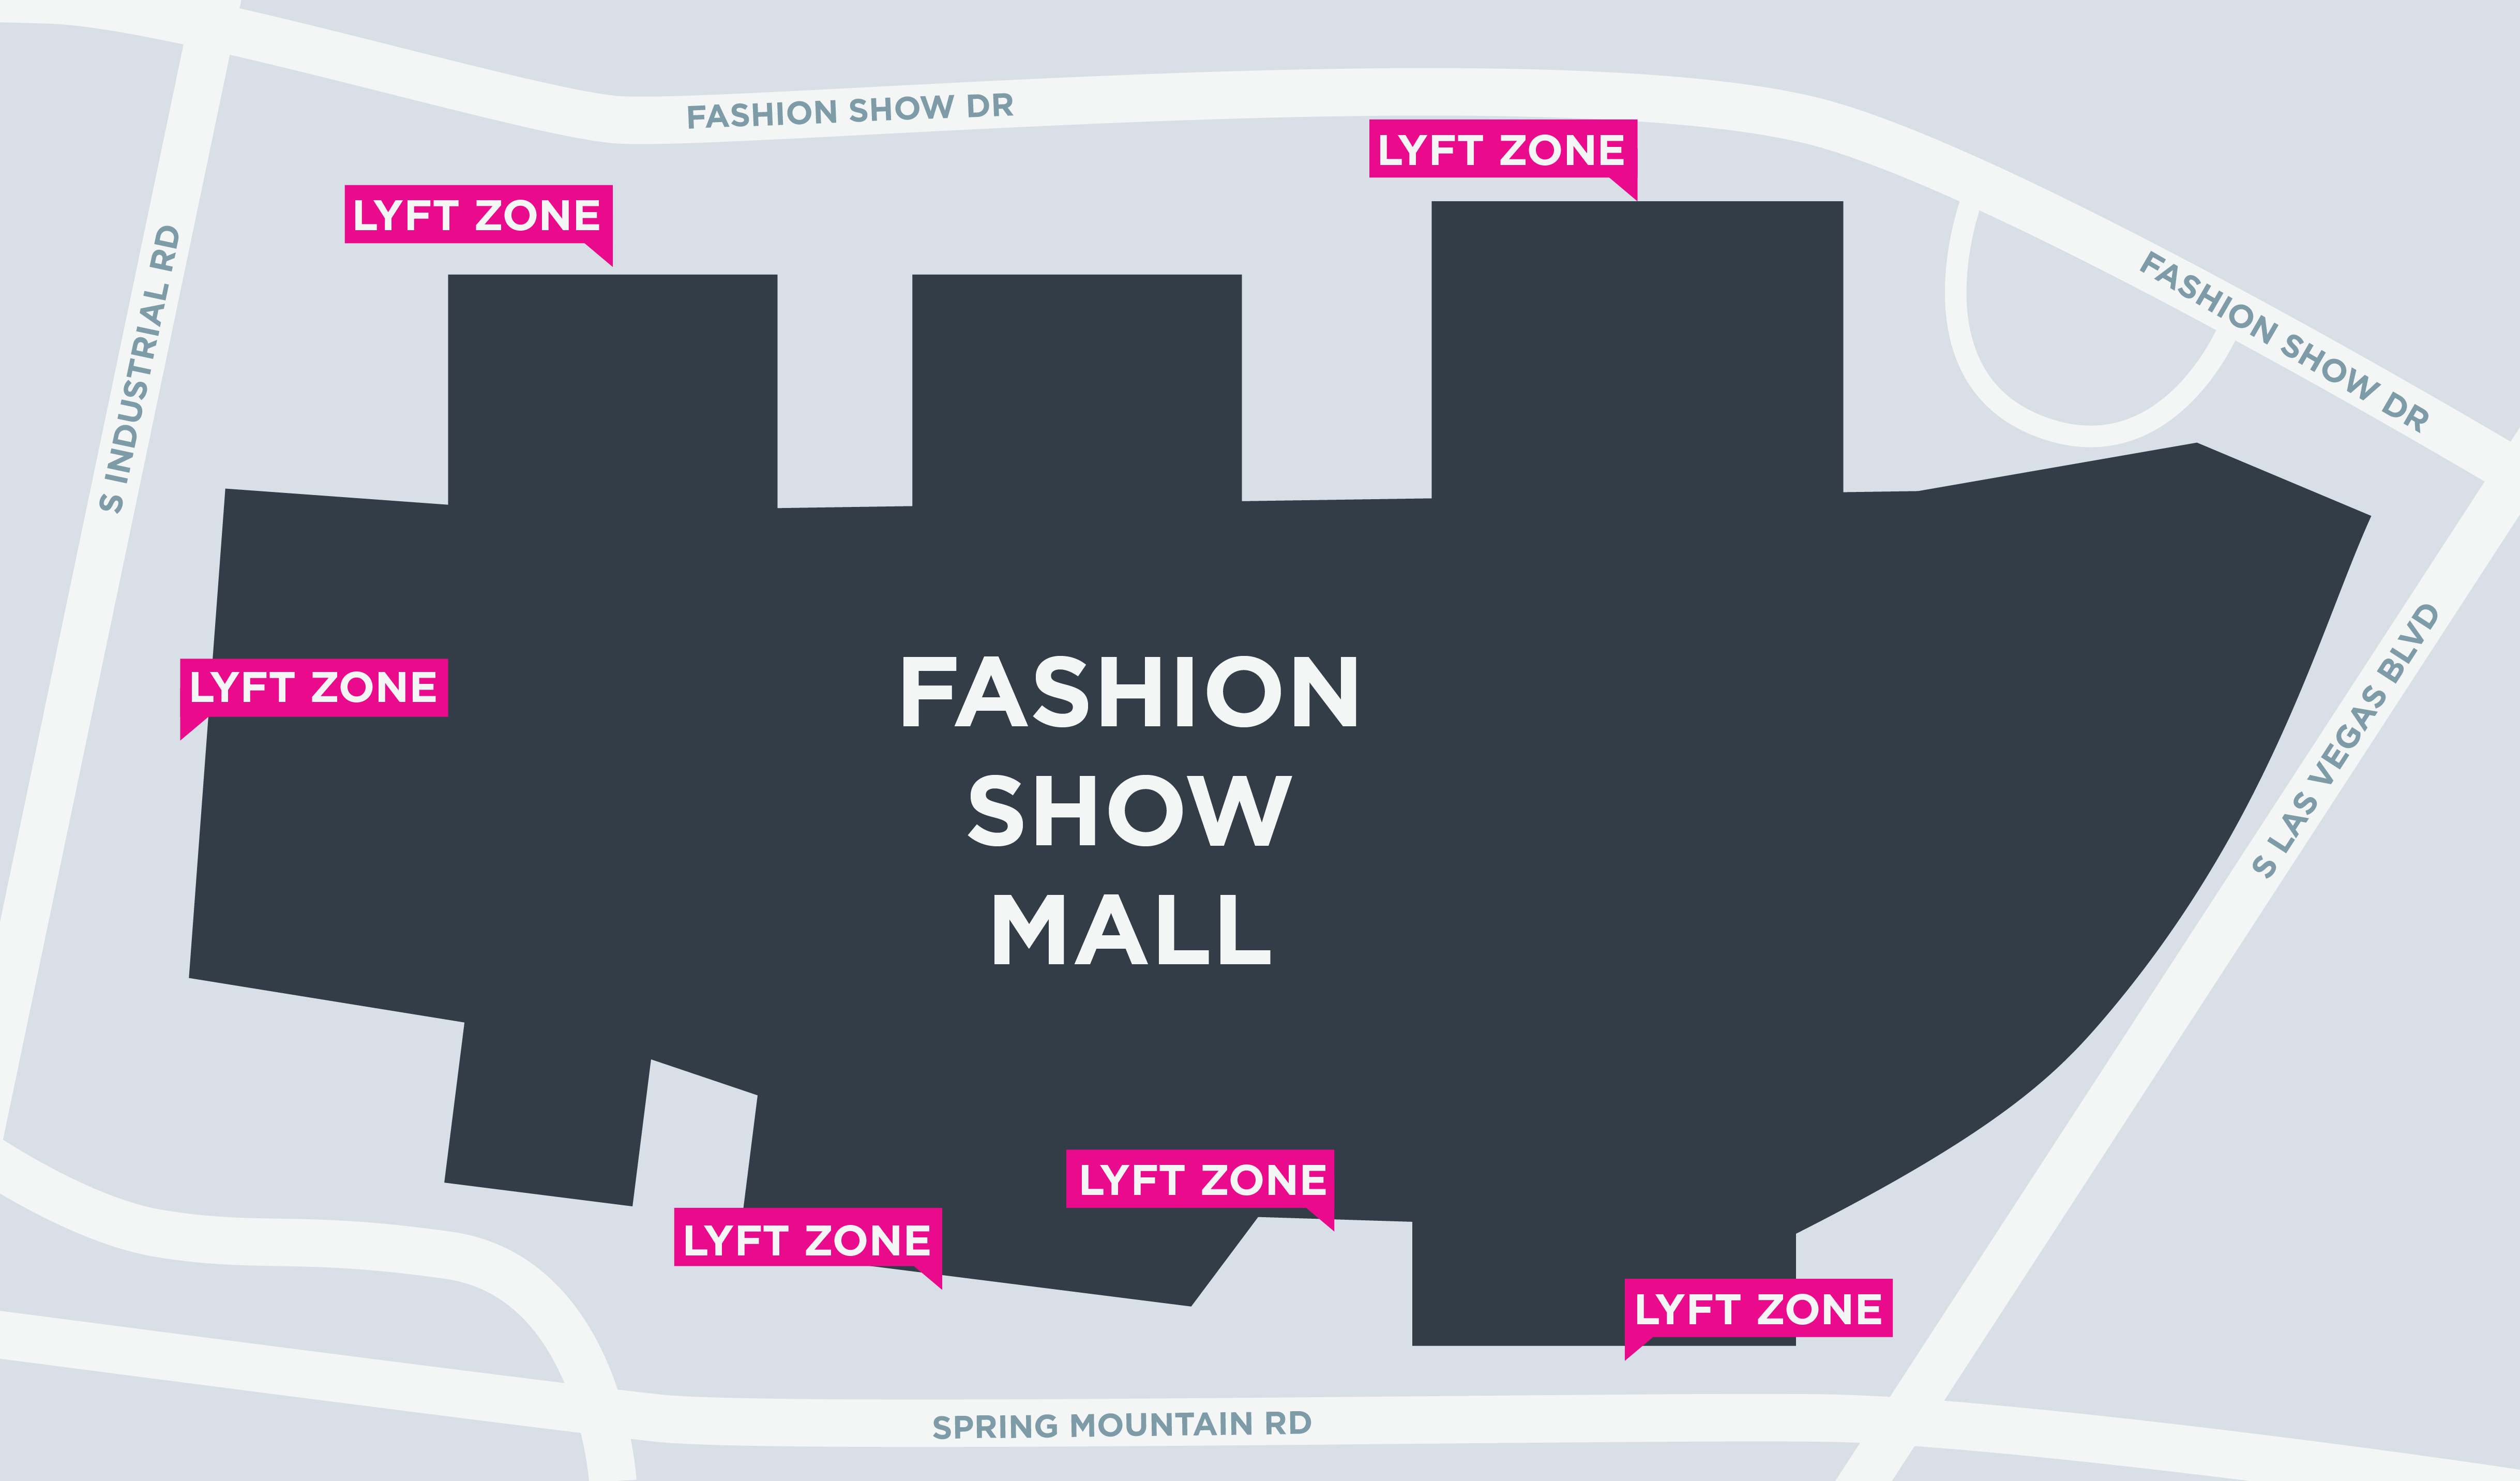 Map of the Lyft zones at the Fashion Show Mall in Las Vegas.